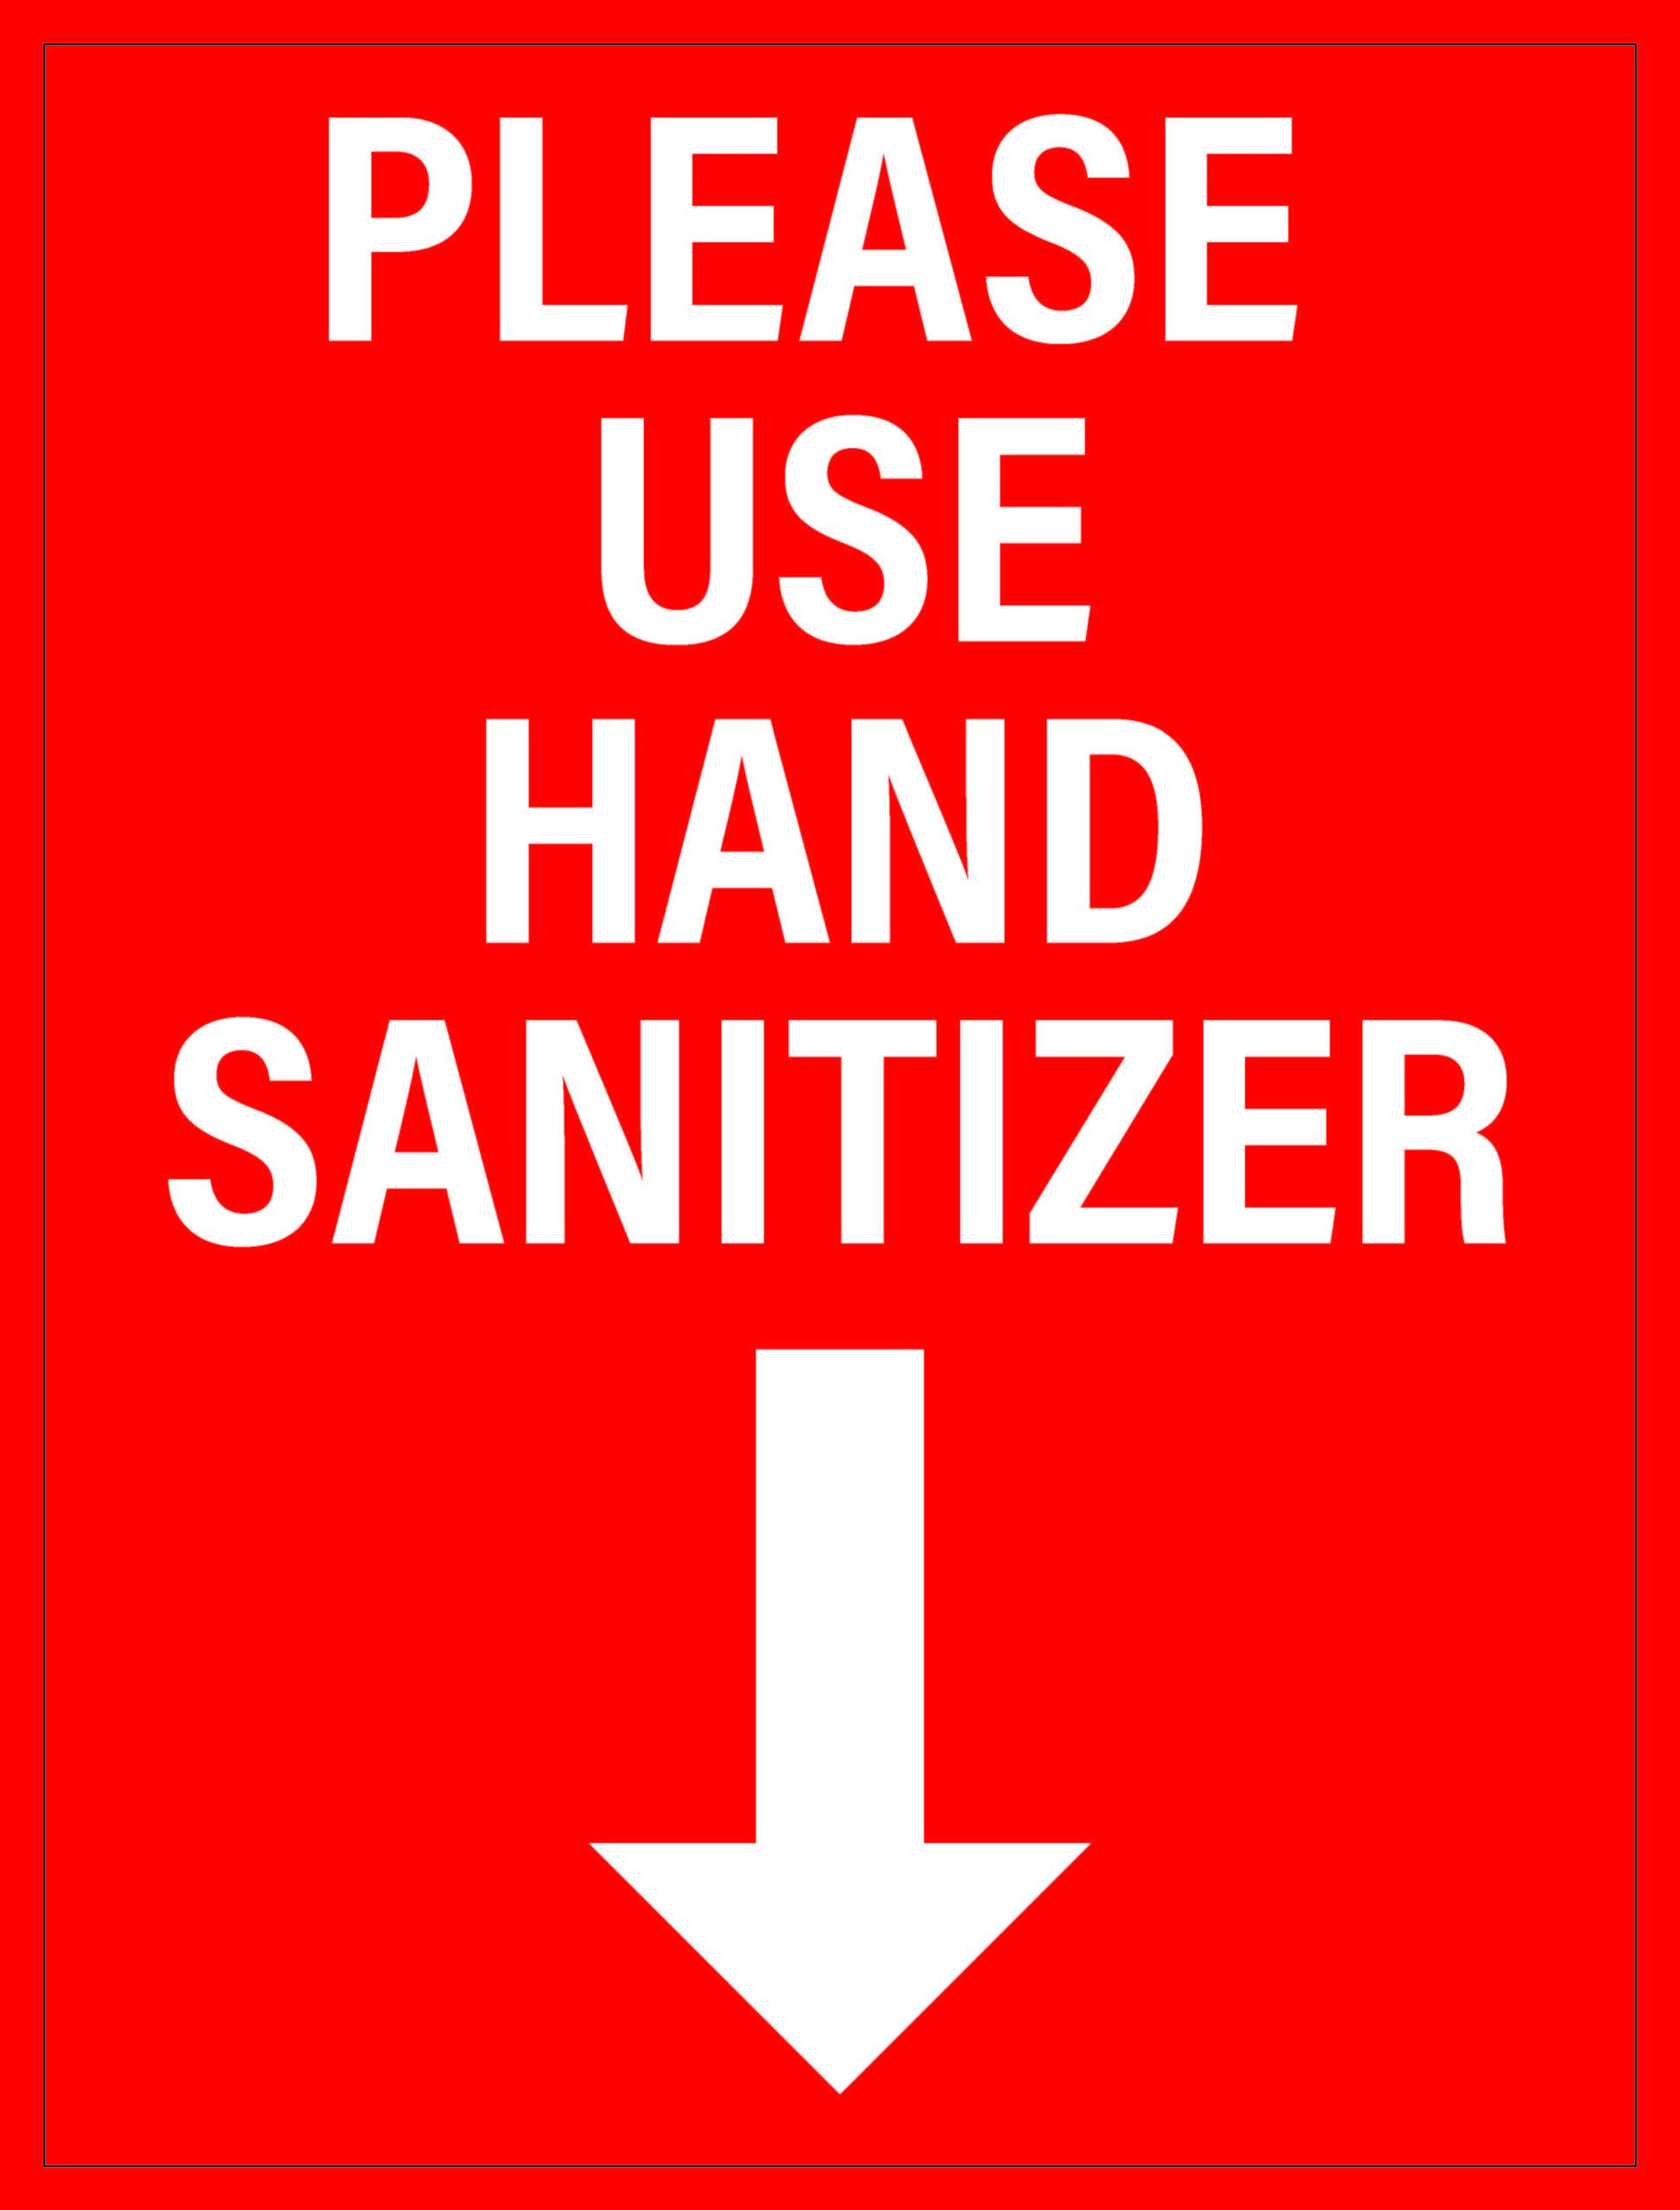 Hand Sanitizer Stand Signs 18" x 24" Single-side Print on White Corrugated Plastic.